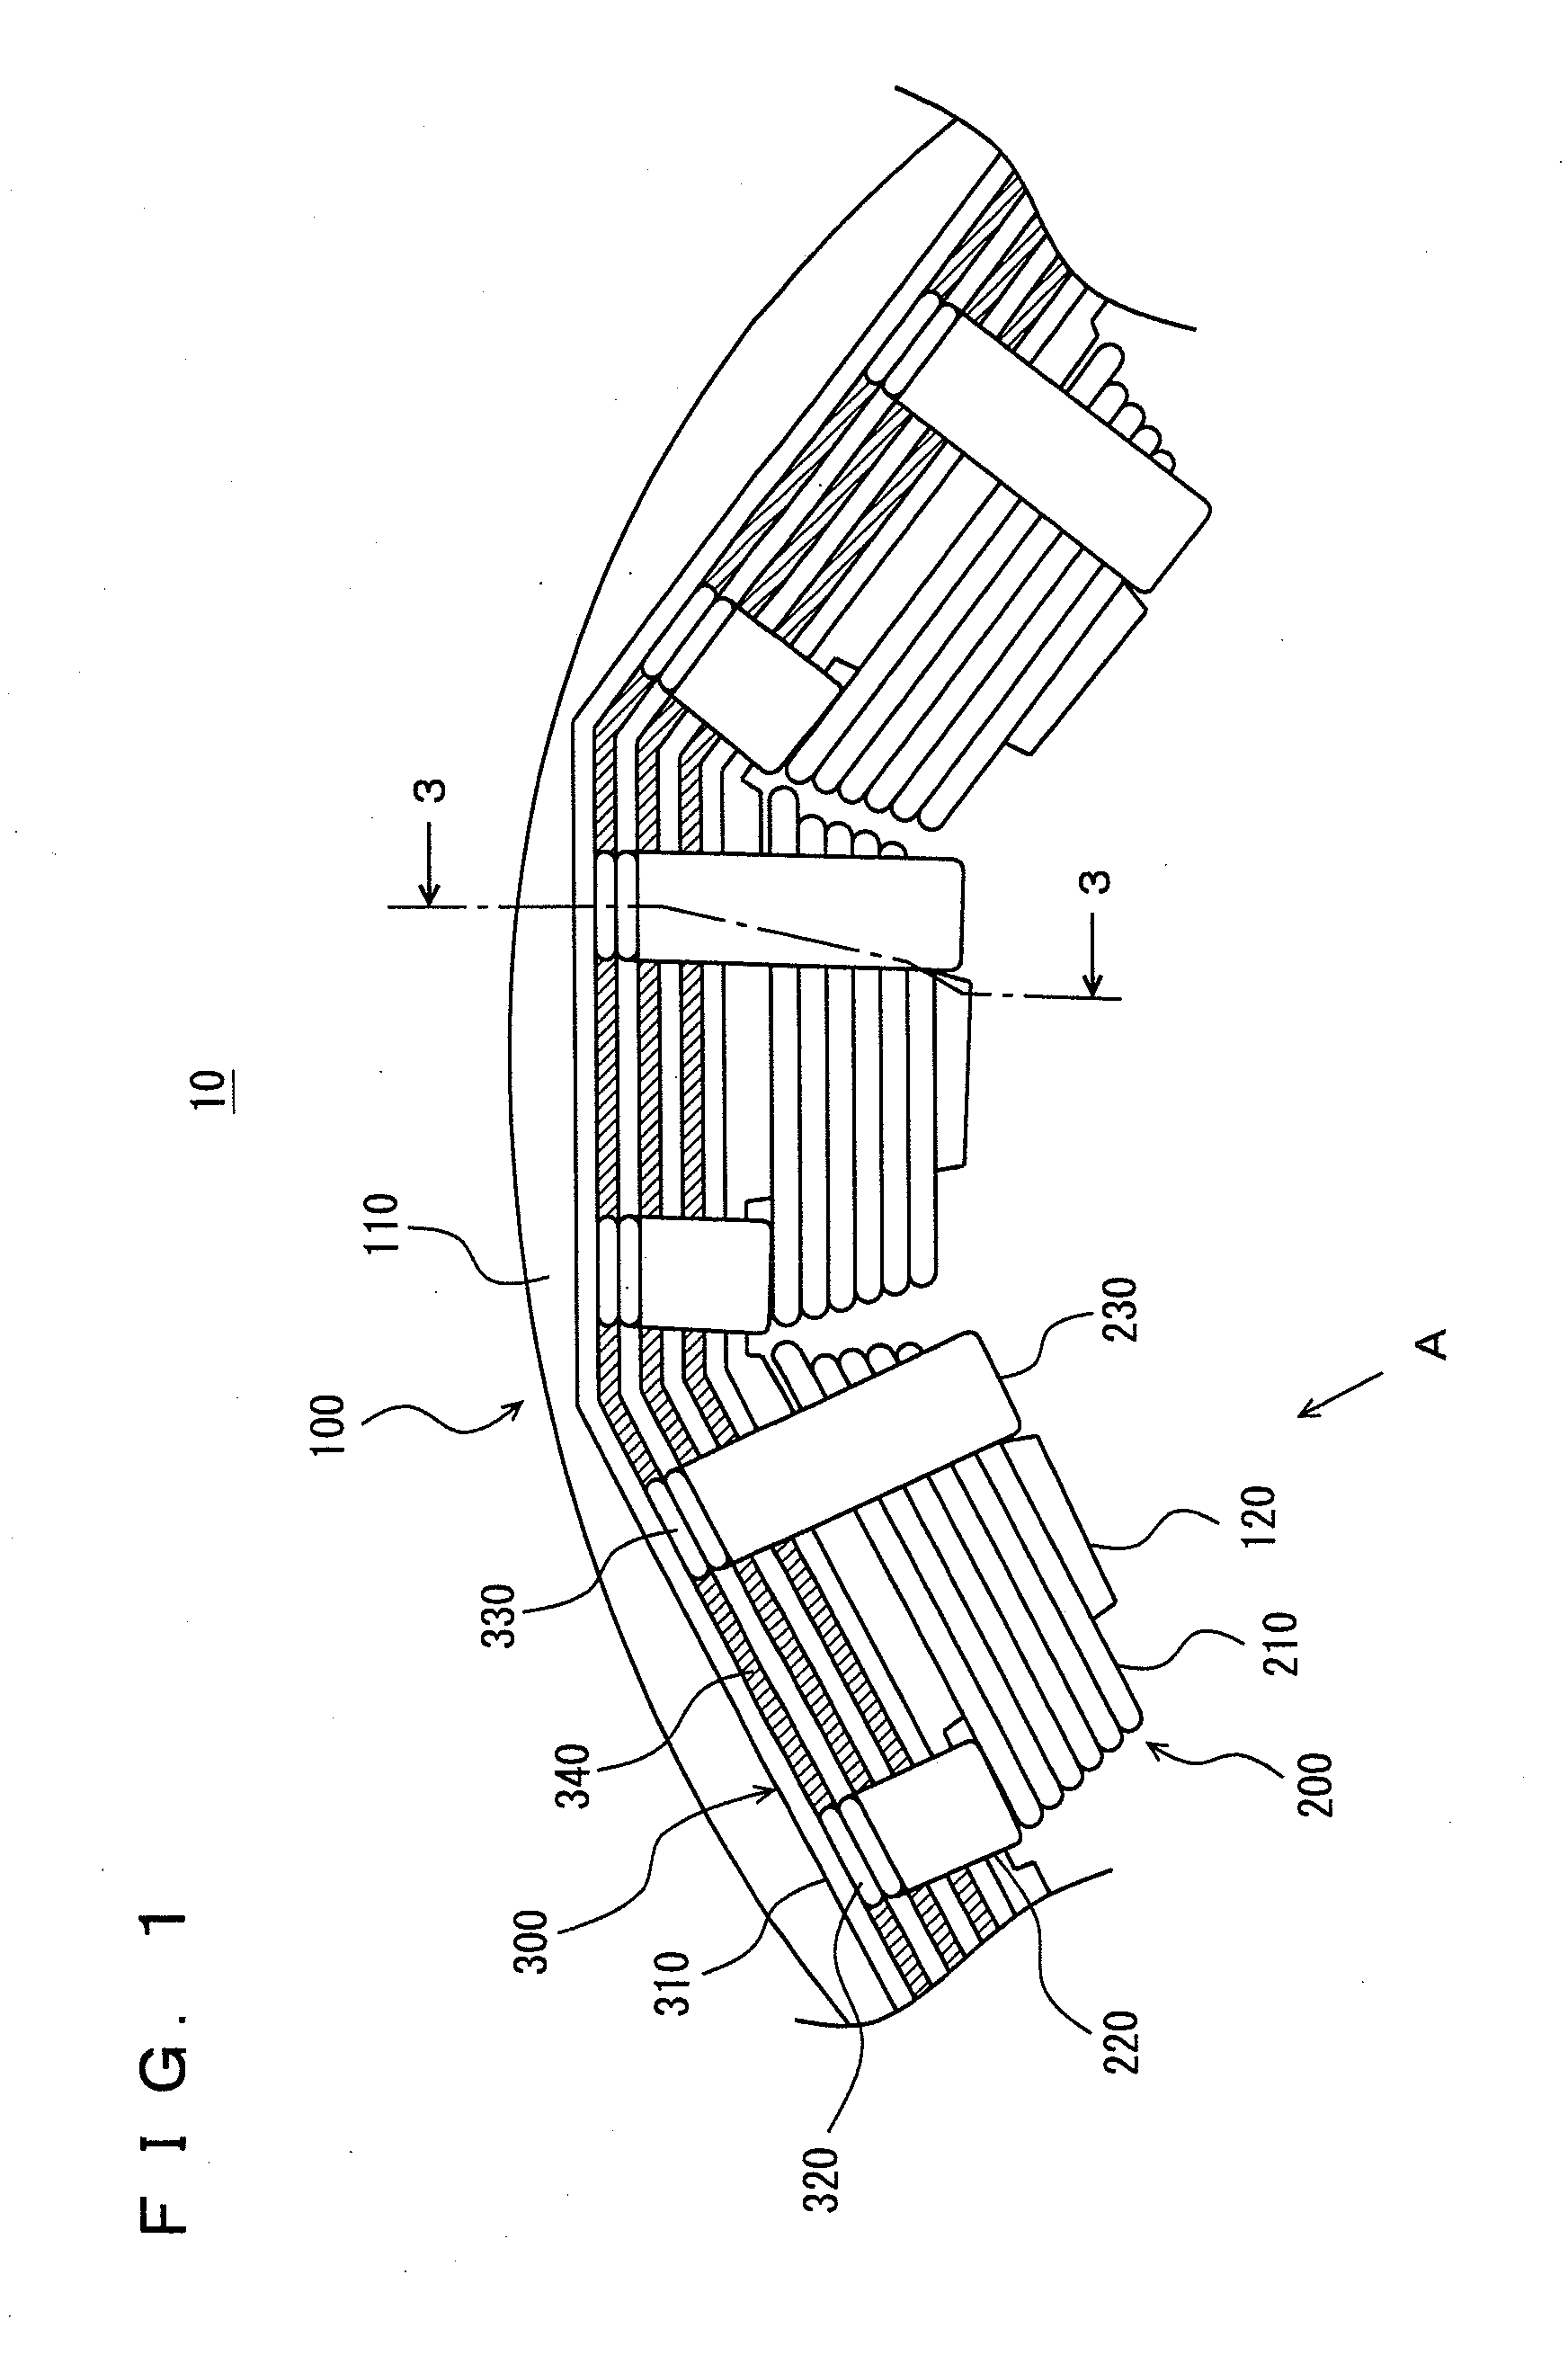 Connection line used for stator of electric motor, stator including that connection line, and method for bending the connection line